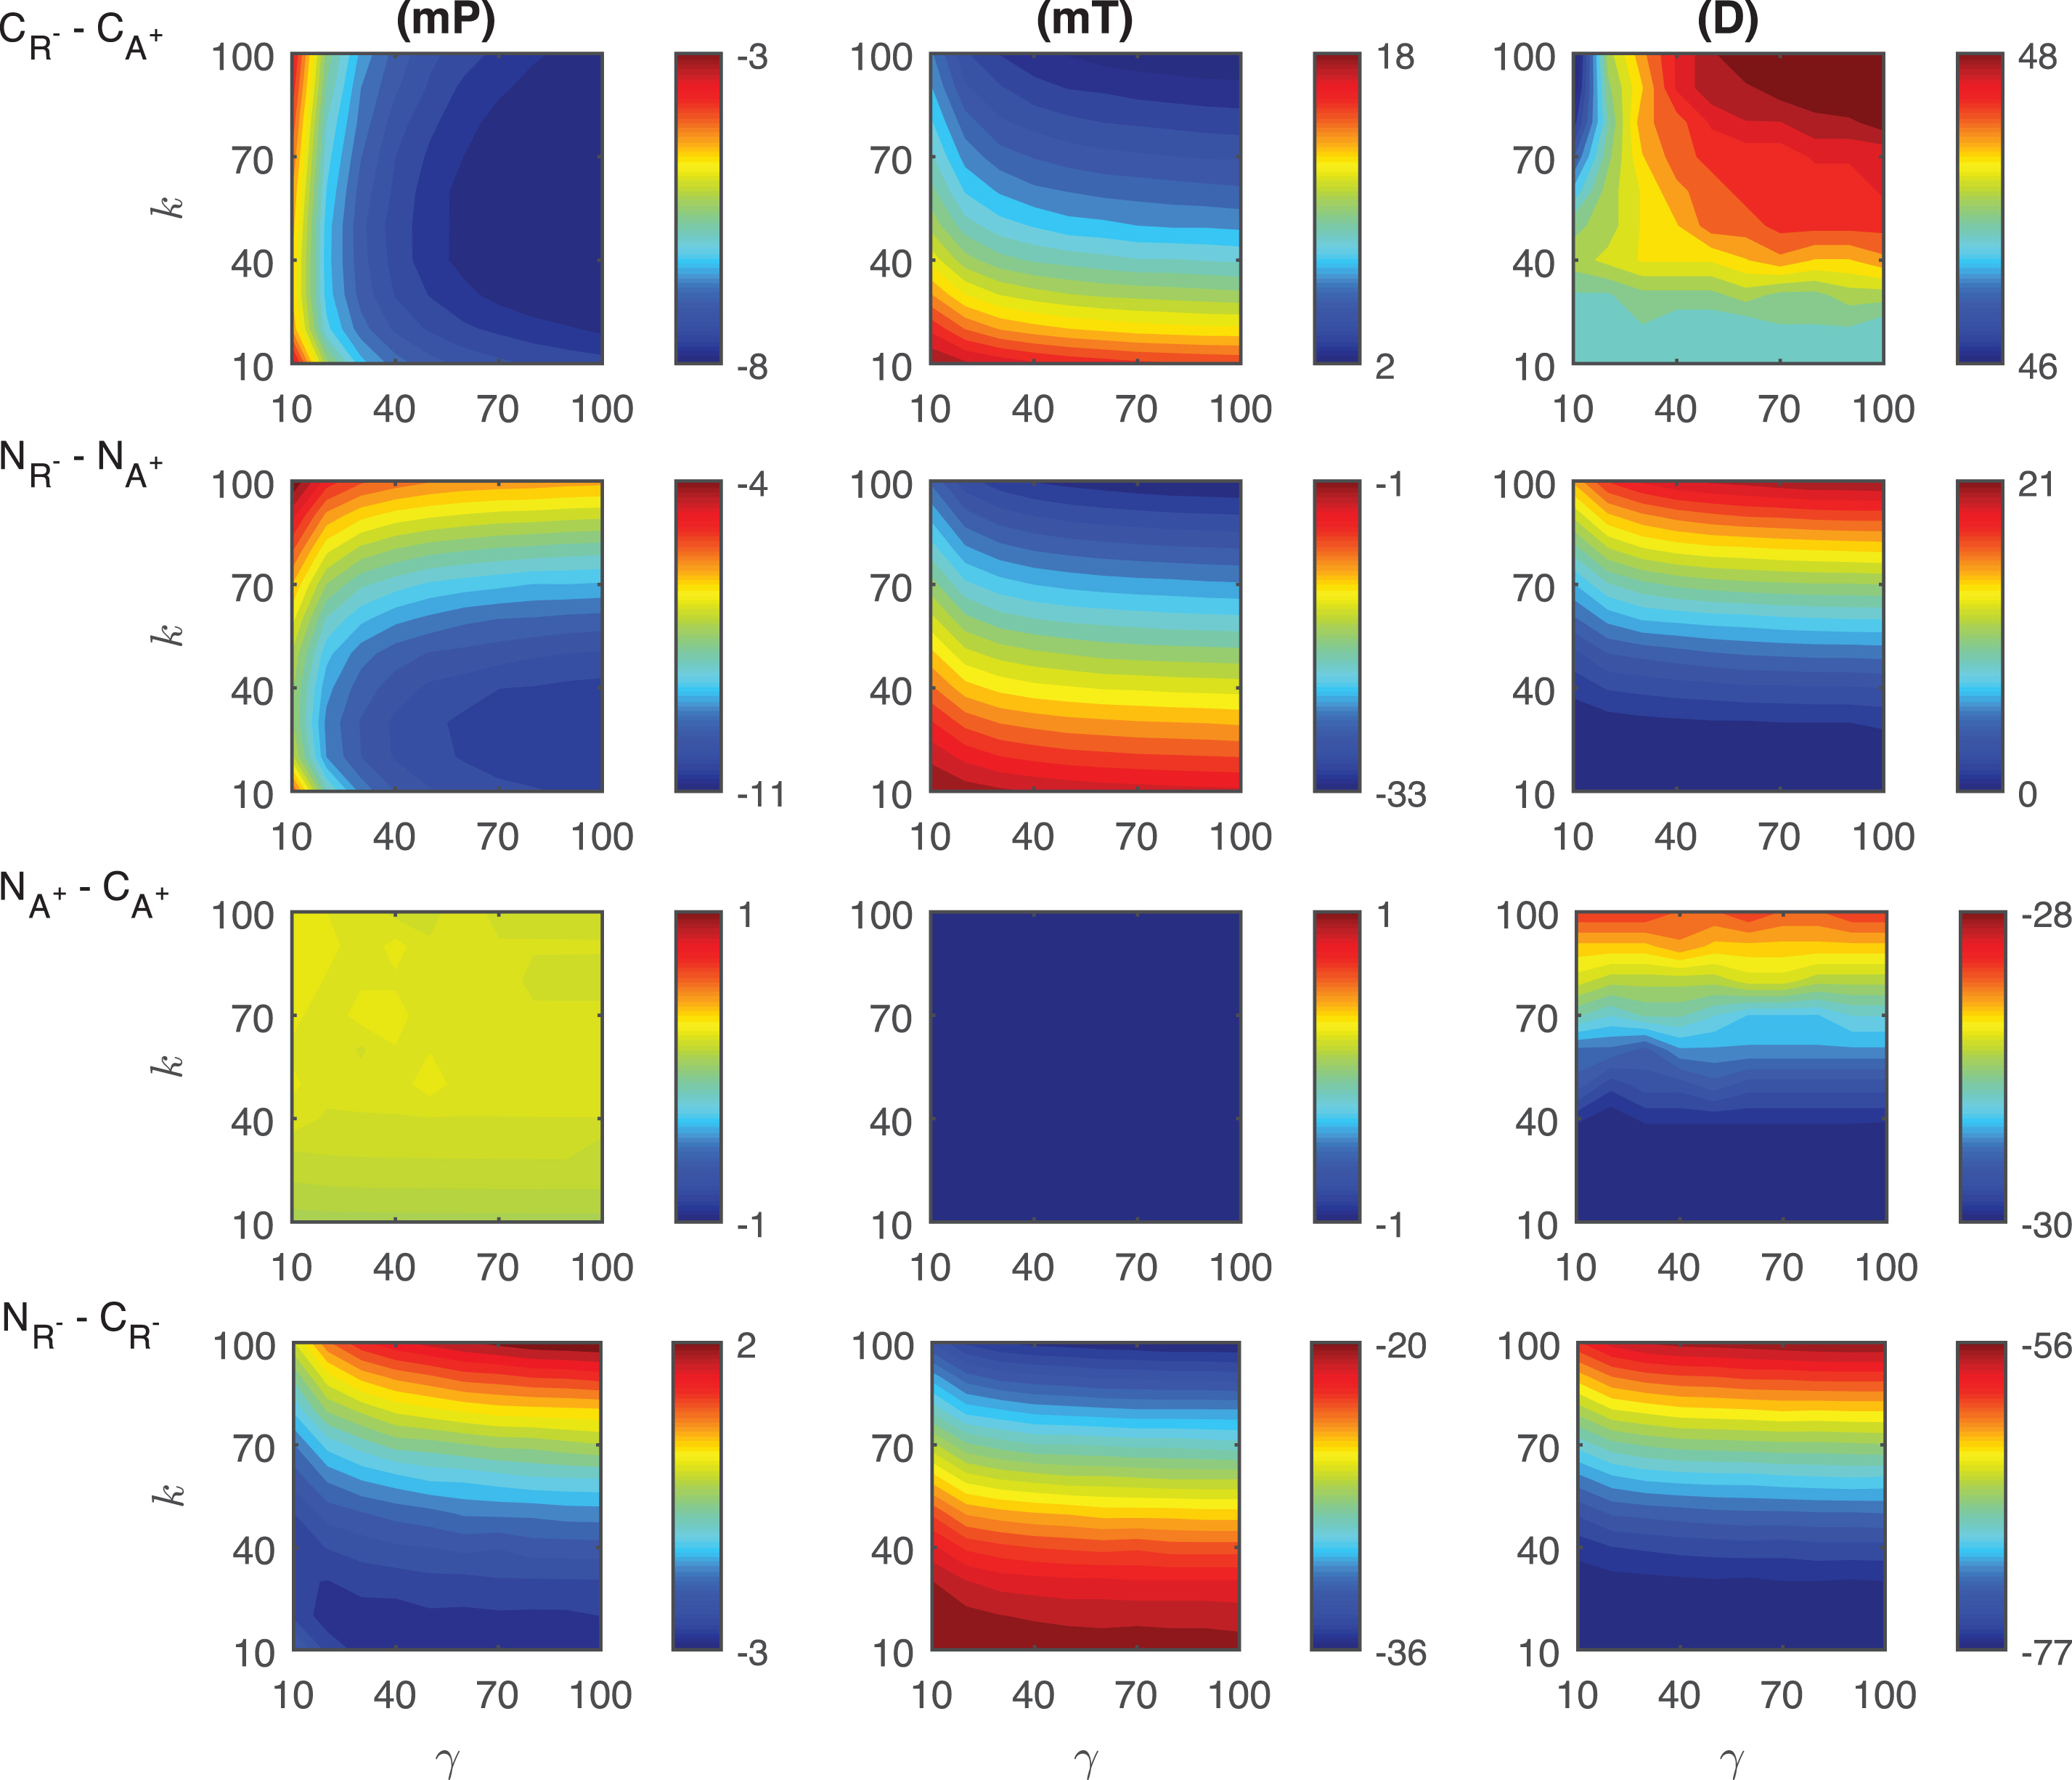 Heat maps for the comparison of the differences of three metrics (mid-protein level mP, time to reach mid-protein level mT and duration D) showing the dynamics of competitive (CA−, CR+) and noncompetitive (NA−, NR+) inhibition mechanisms. For all these simulations, the signal amplitude γ and persistency k are changed from 10-100 fold when ro = 10−4 while all the other parameters were kept constant at their estimated values listed in Section 3. For details see the text.